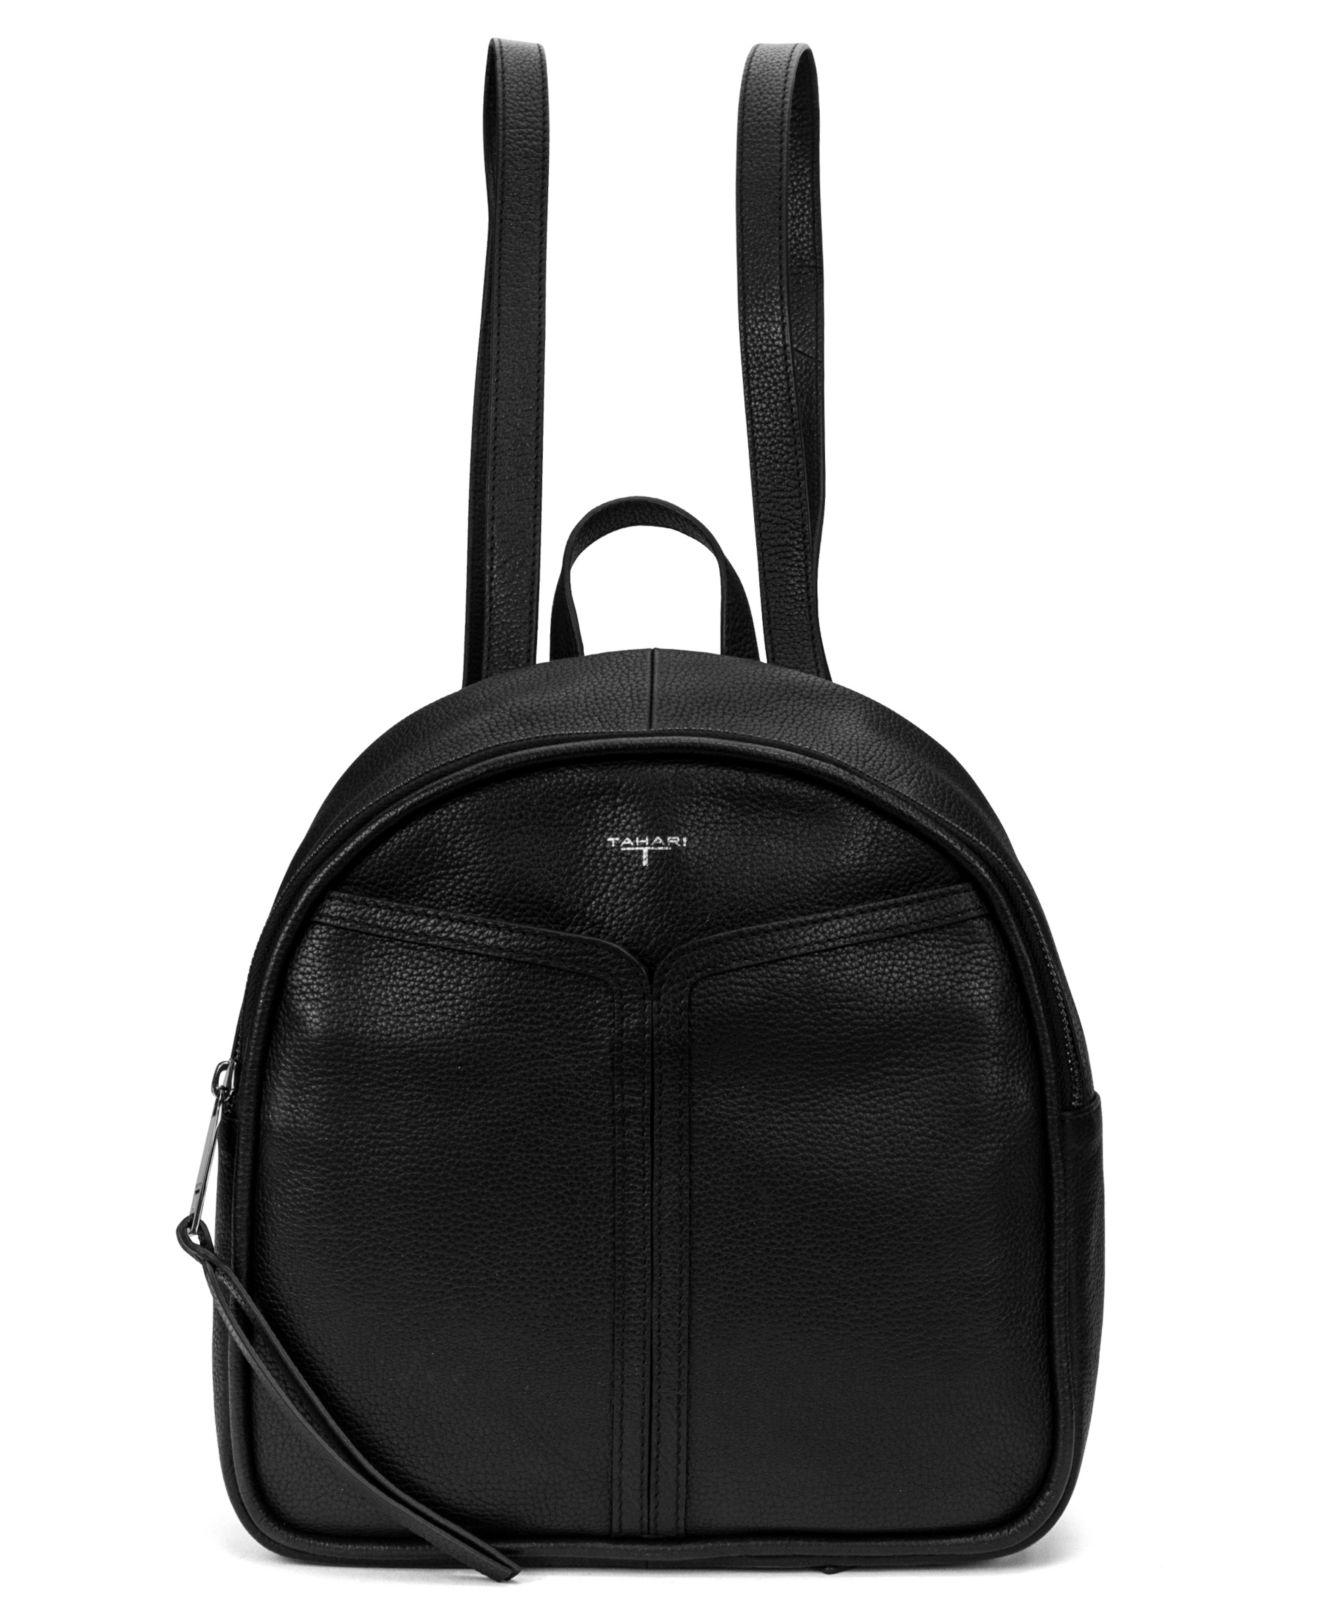 T Tahari Leather Courtney Backpack in Black - Lyst